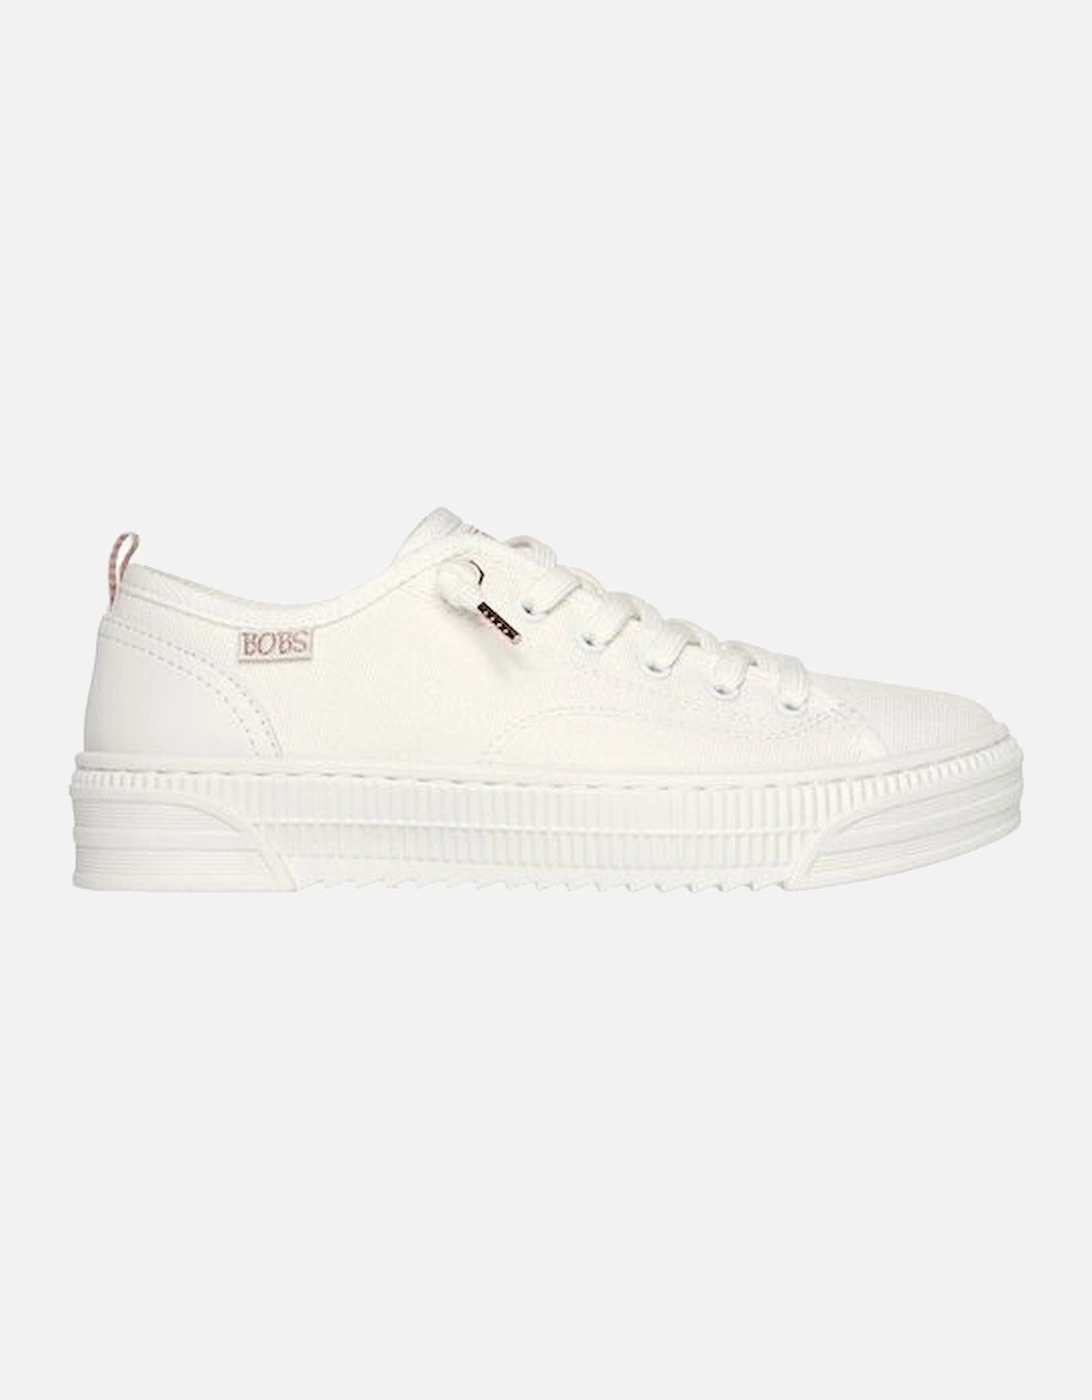 114640 Bobs Copa in Off White, 2 of 1